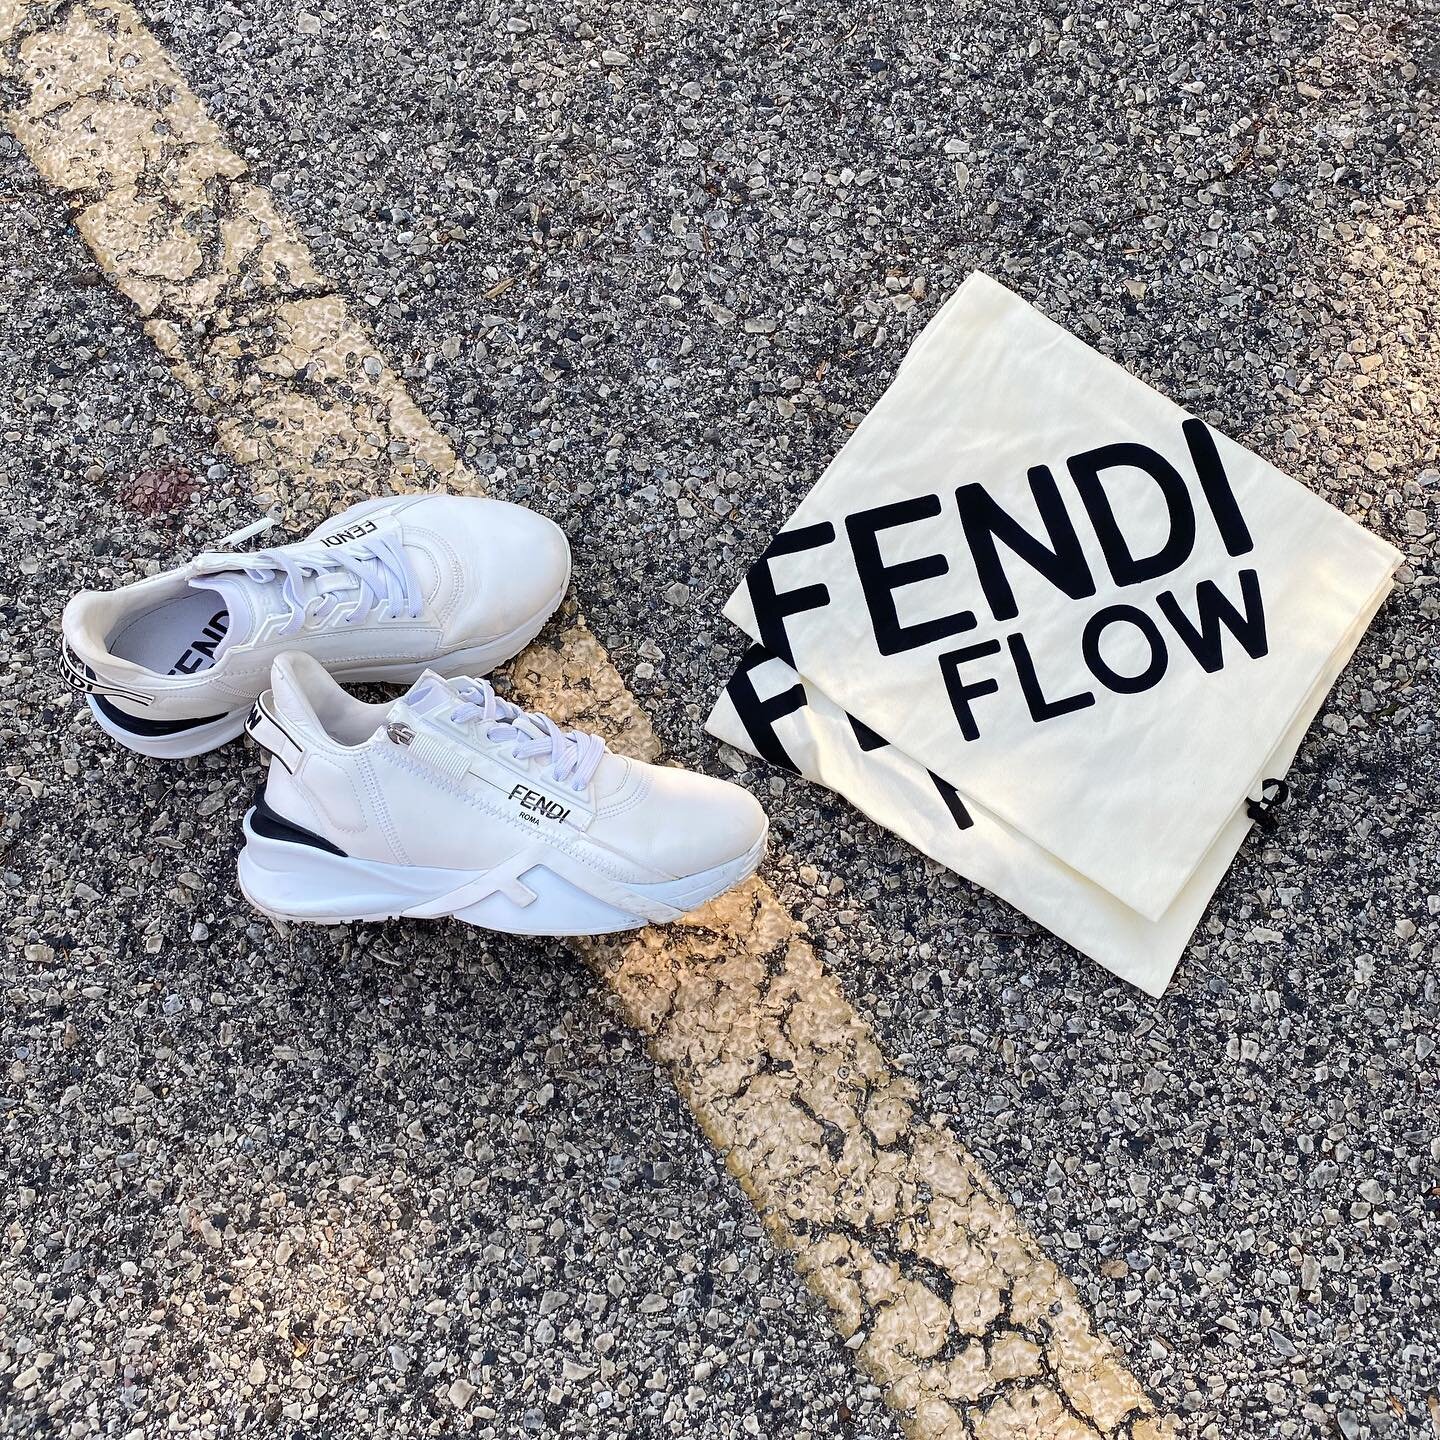 🌟Fendi🌟 Stop by and check out these white sneakers from Fendi🤍

Available for 325.95

For inquiries call or email us!
Phone: 267.331.6725
Email: chestnuthill@greenestreet.com
.
.
.
.
#greenestreetchestnuthill #greenestreet #prada #pradabag #second